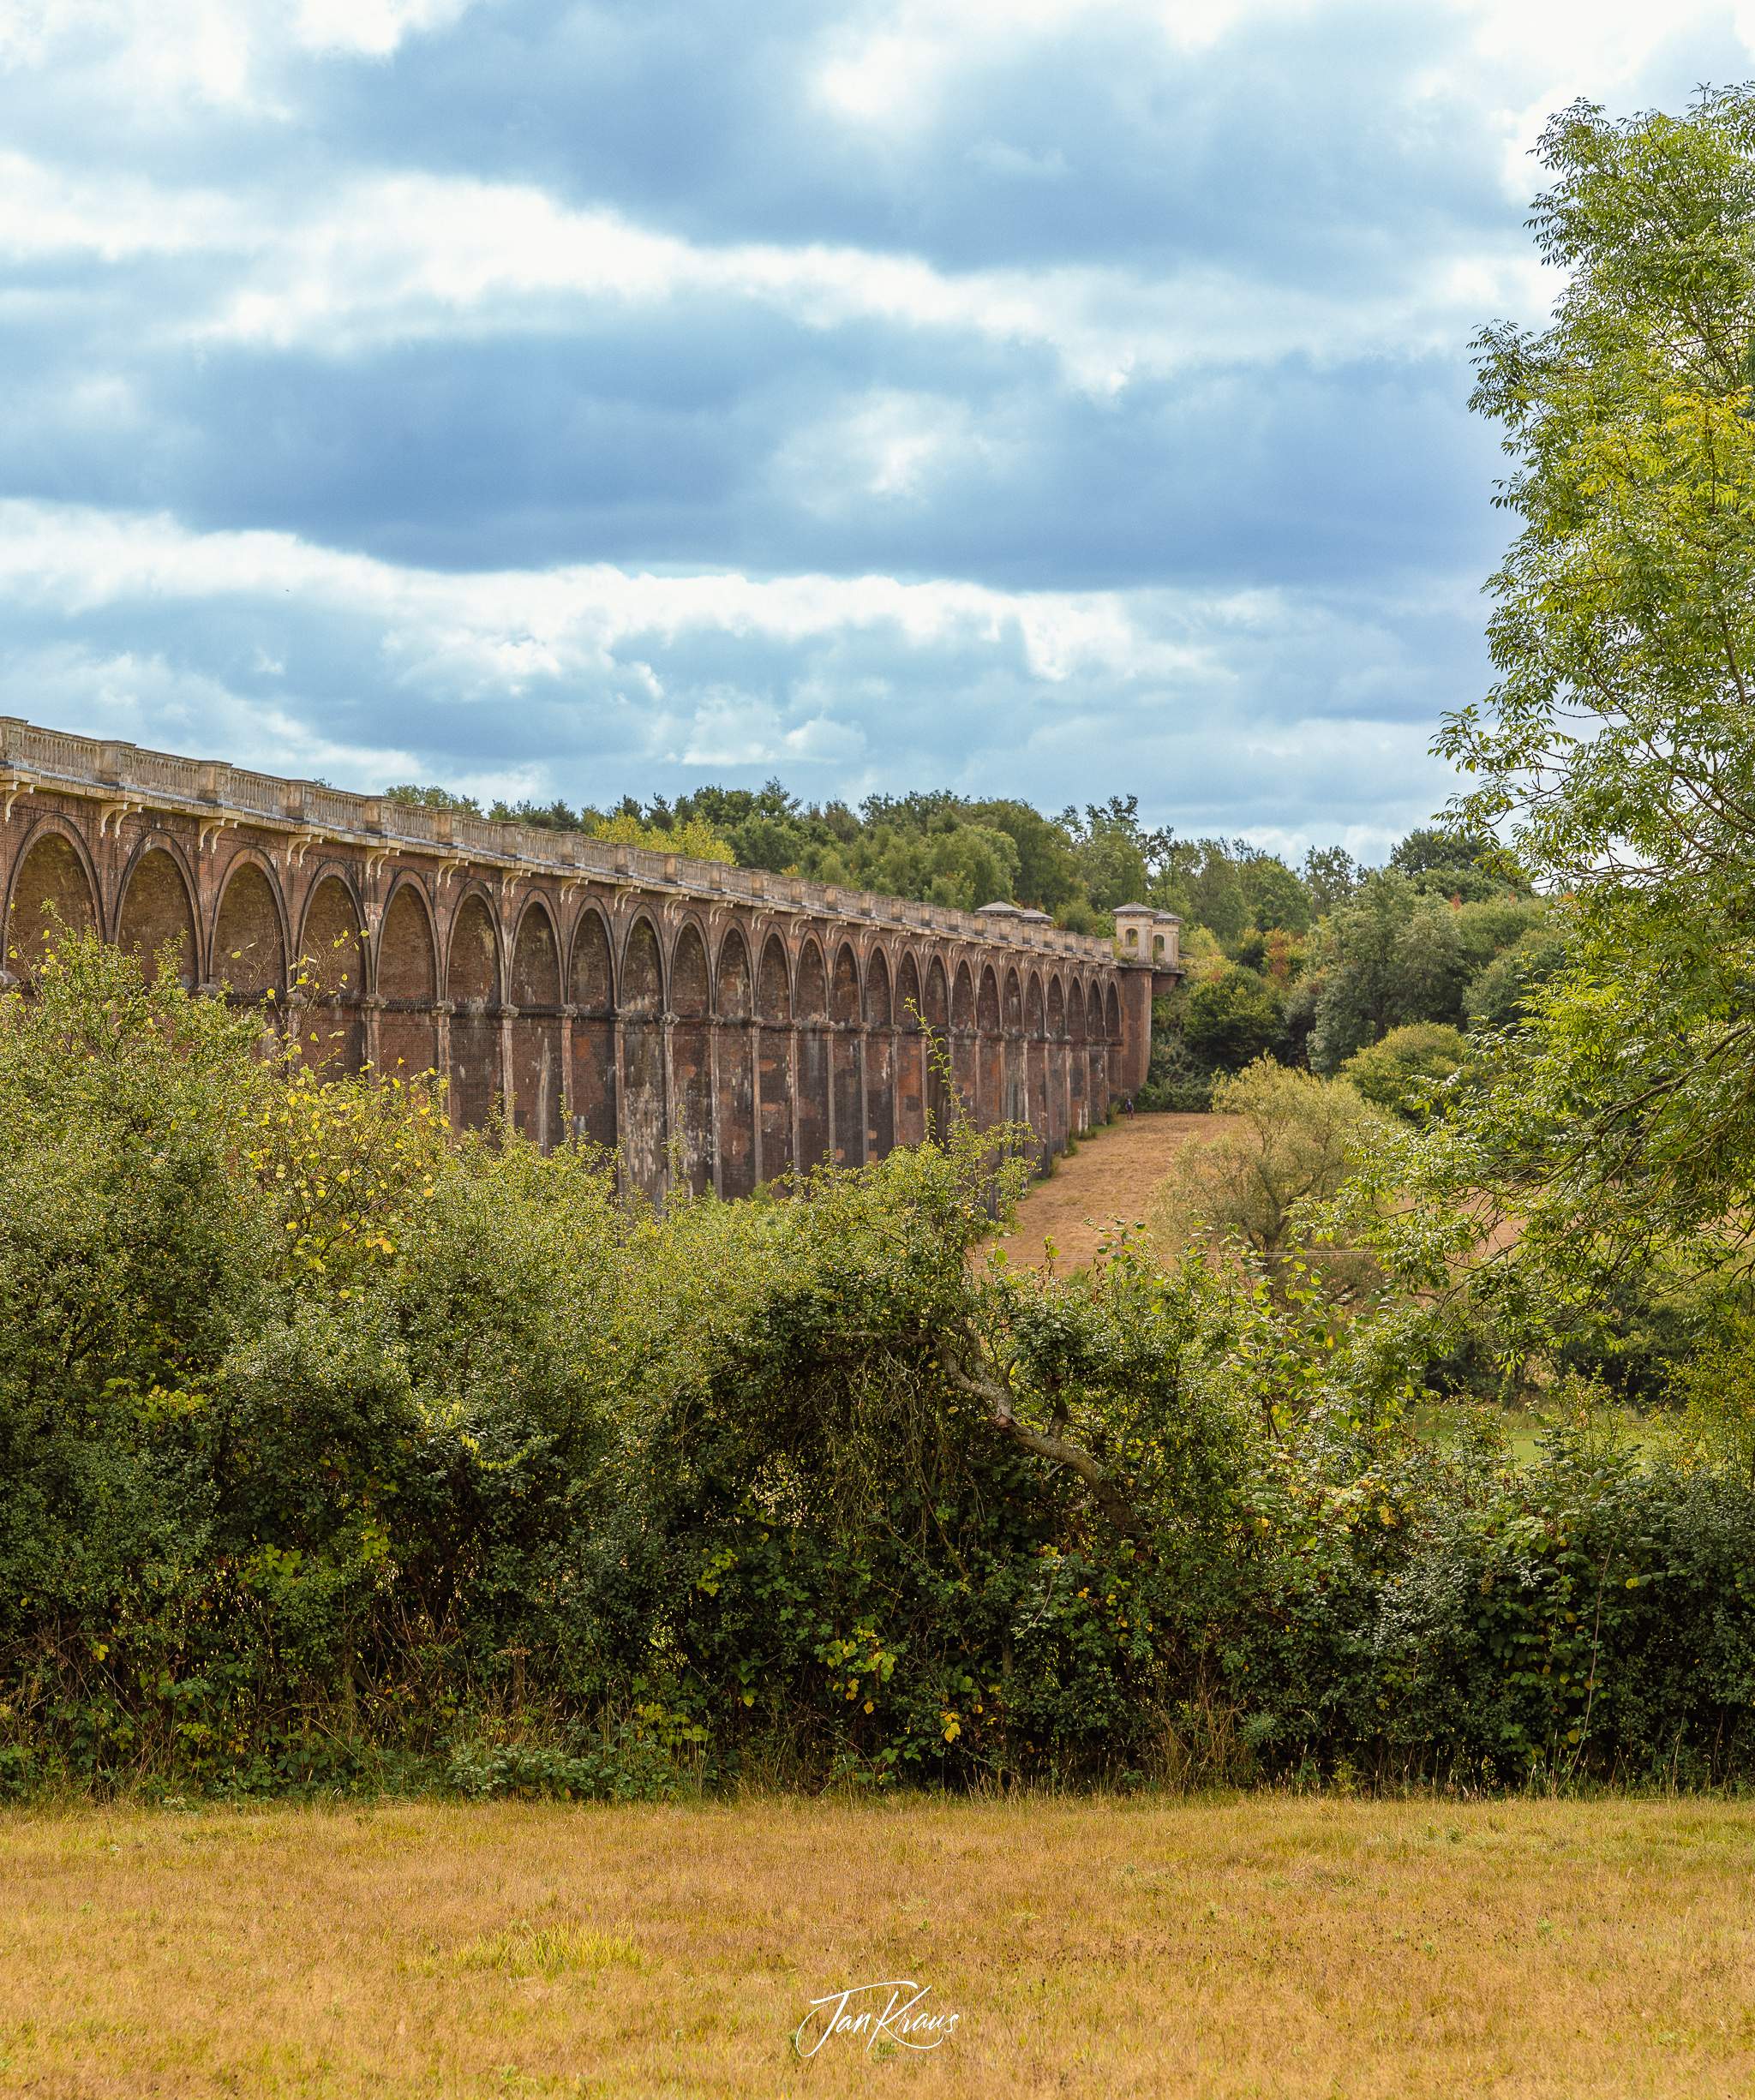 The Ouse Valley Viaduct, Sussex, England, UK